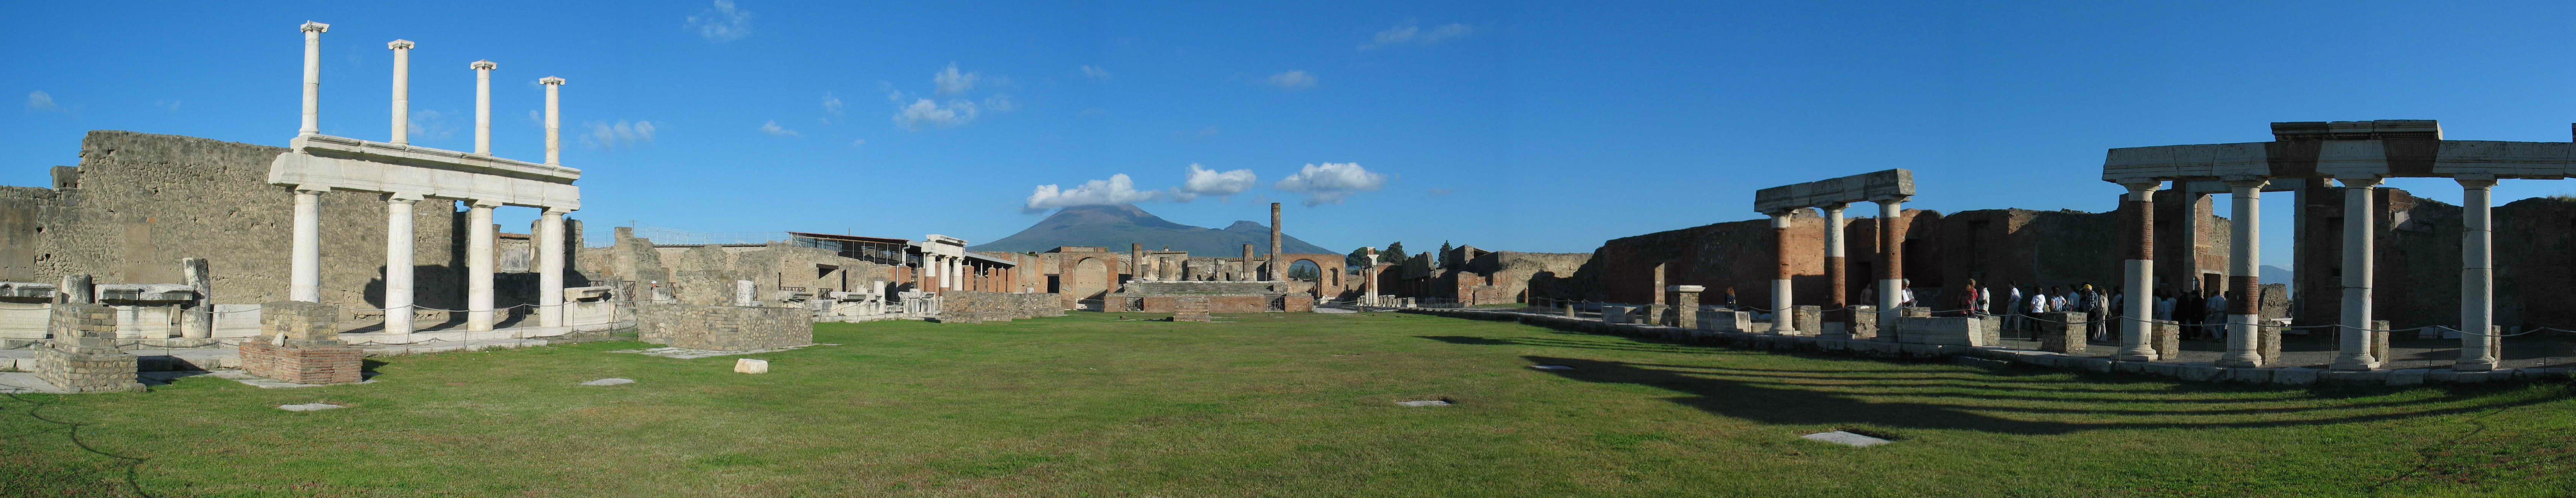 Life and Death in Pompeii and Herculaneum - Review